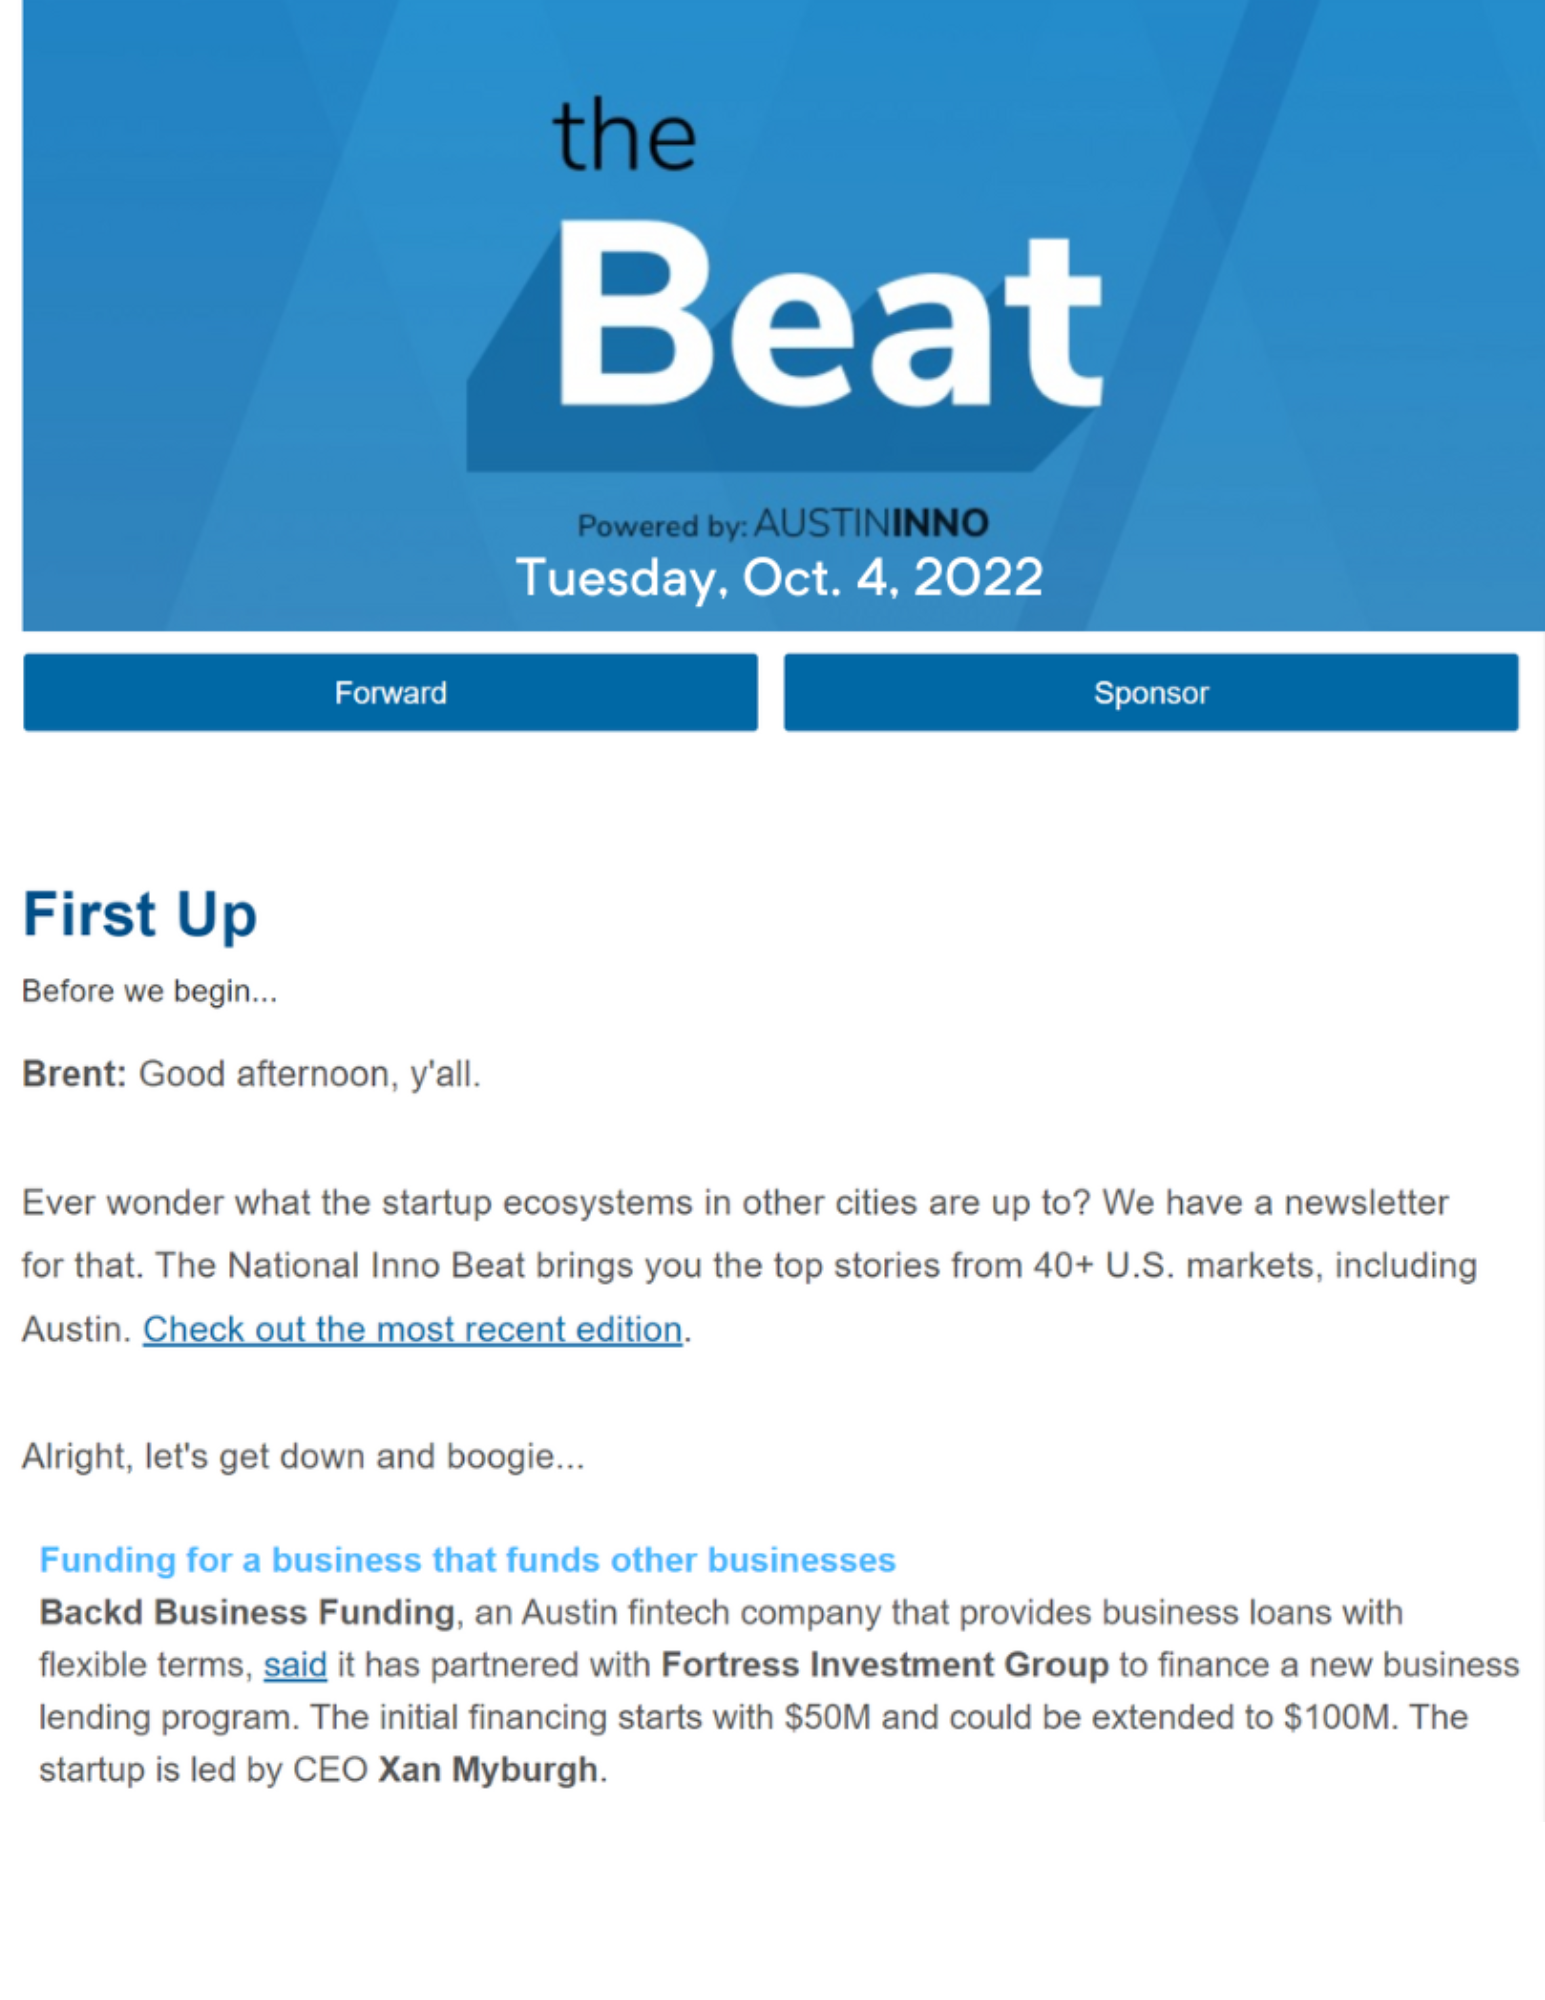 Backd Featured in Austin Inno's "The Beat"